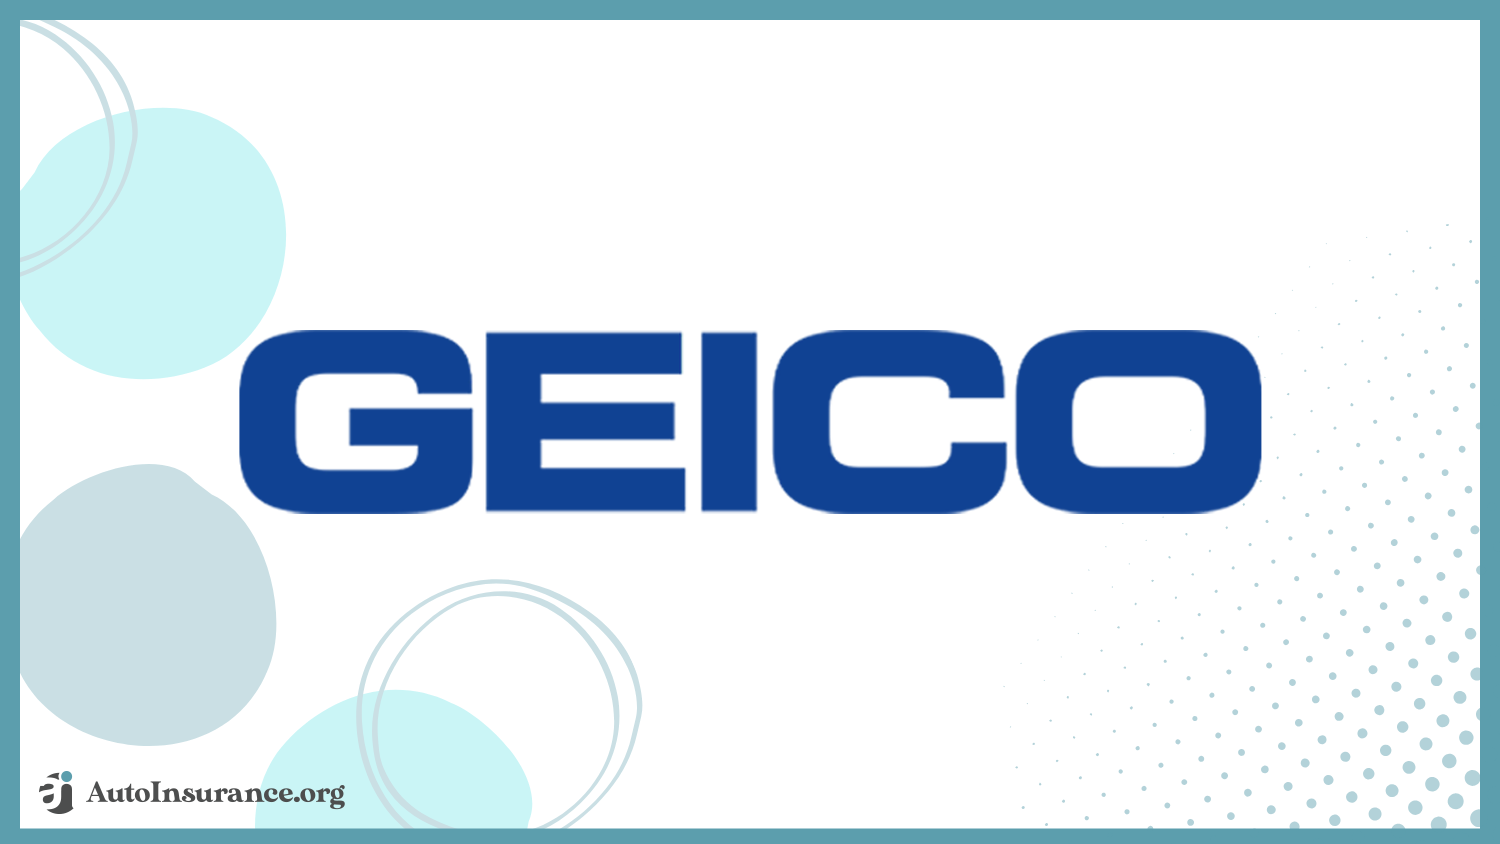 Geico: Best Auto Insurance for Low-Income Drivers